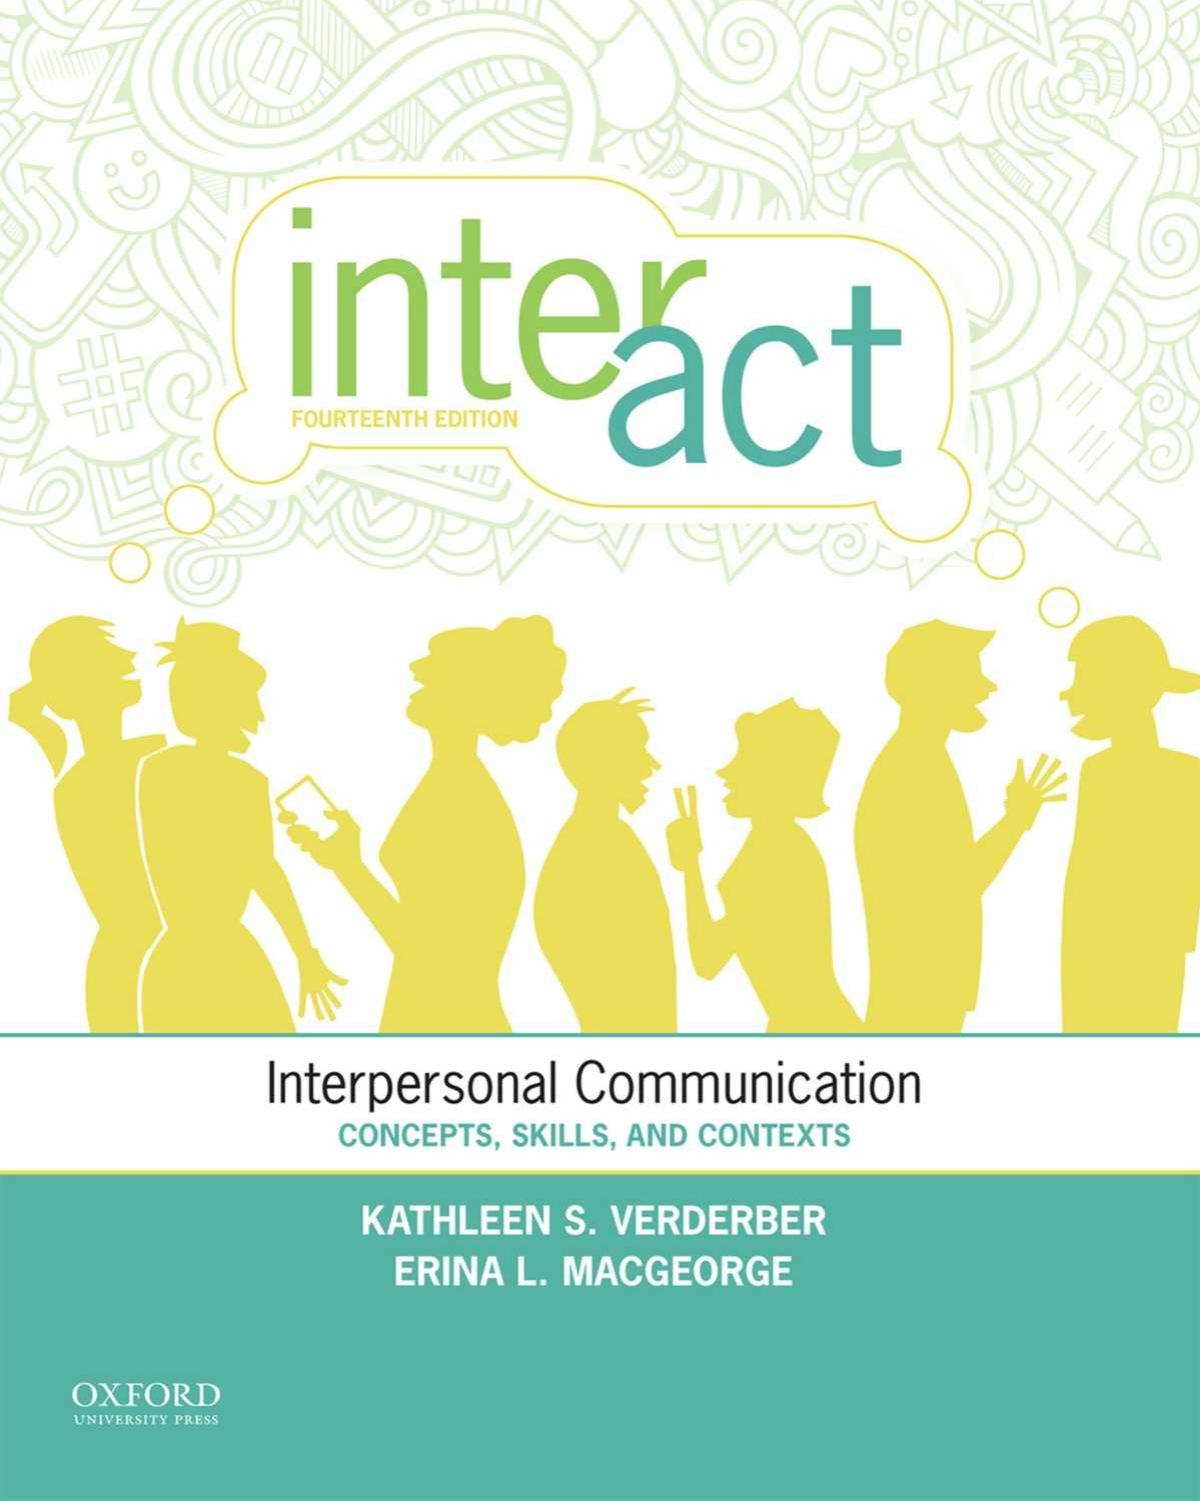 (eBook PDF)Inter-Act: Interpersonal Communication: Concepts, Skills, and Contexts 14th Edition by Kathleen S. Verderber,Erina L. MacGeorge